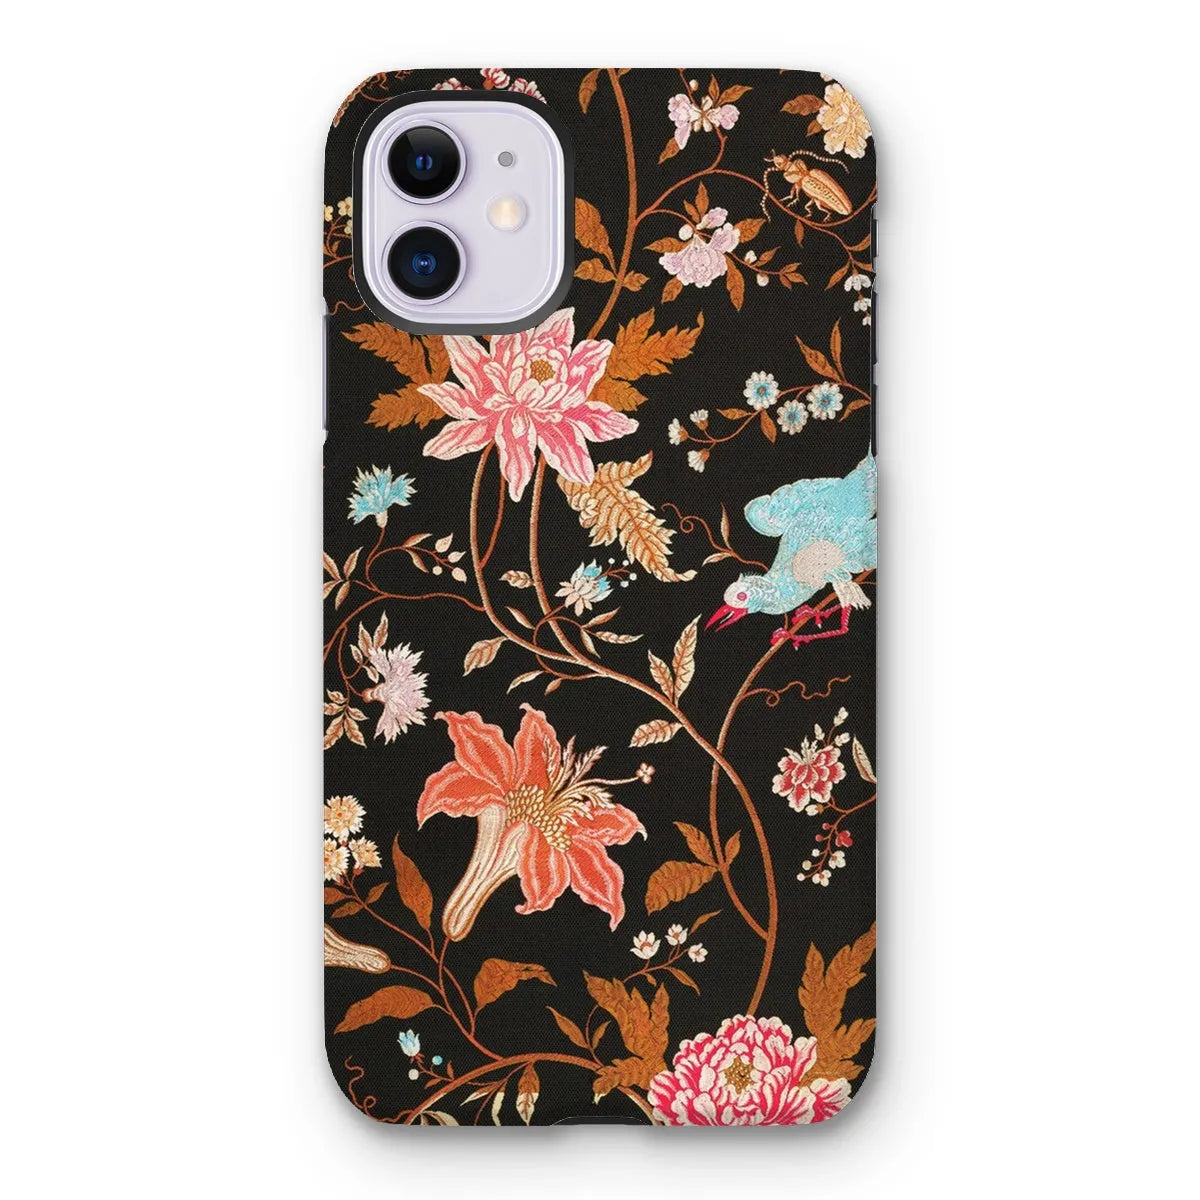 Midnight Call - Indian Aesthetic Fabric Art Phone Case - Iphone 11 / Matte - Mobile Phone Cases - Aesthetic Art